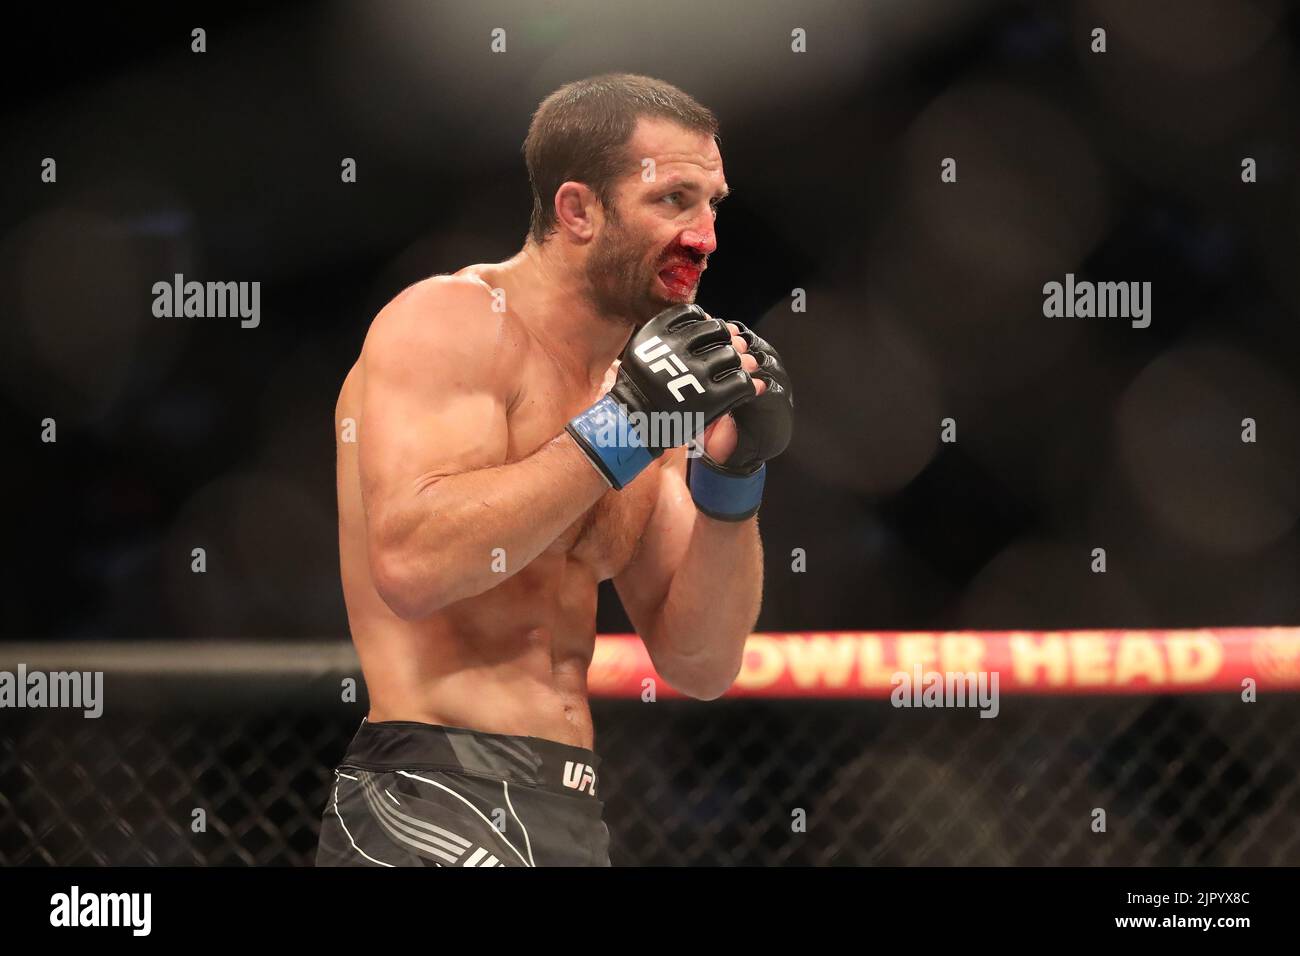 Salt Lake City, United States. 20th Aug, 2022. SALT LAKE CITY, UT - AUGUST 20: Luke Rockhold battles Paulo Costa in their Middleweight bout during the UFC 278 at the Vivint Arena on August 20, 2022 in Salt Lake City, Utah, United States. (Photo by Alejandro Salazar/PxImages) Credit: Px Images/Alamy Live News Stock Photo